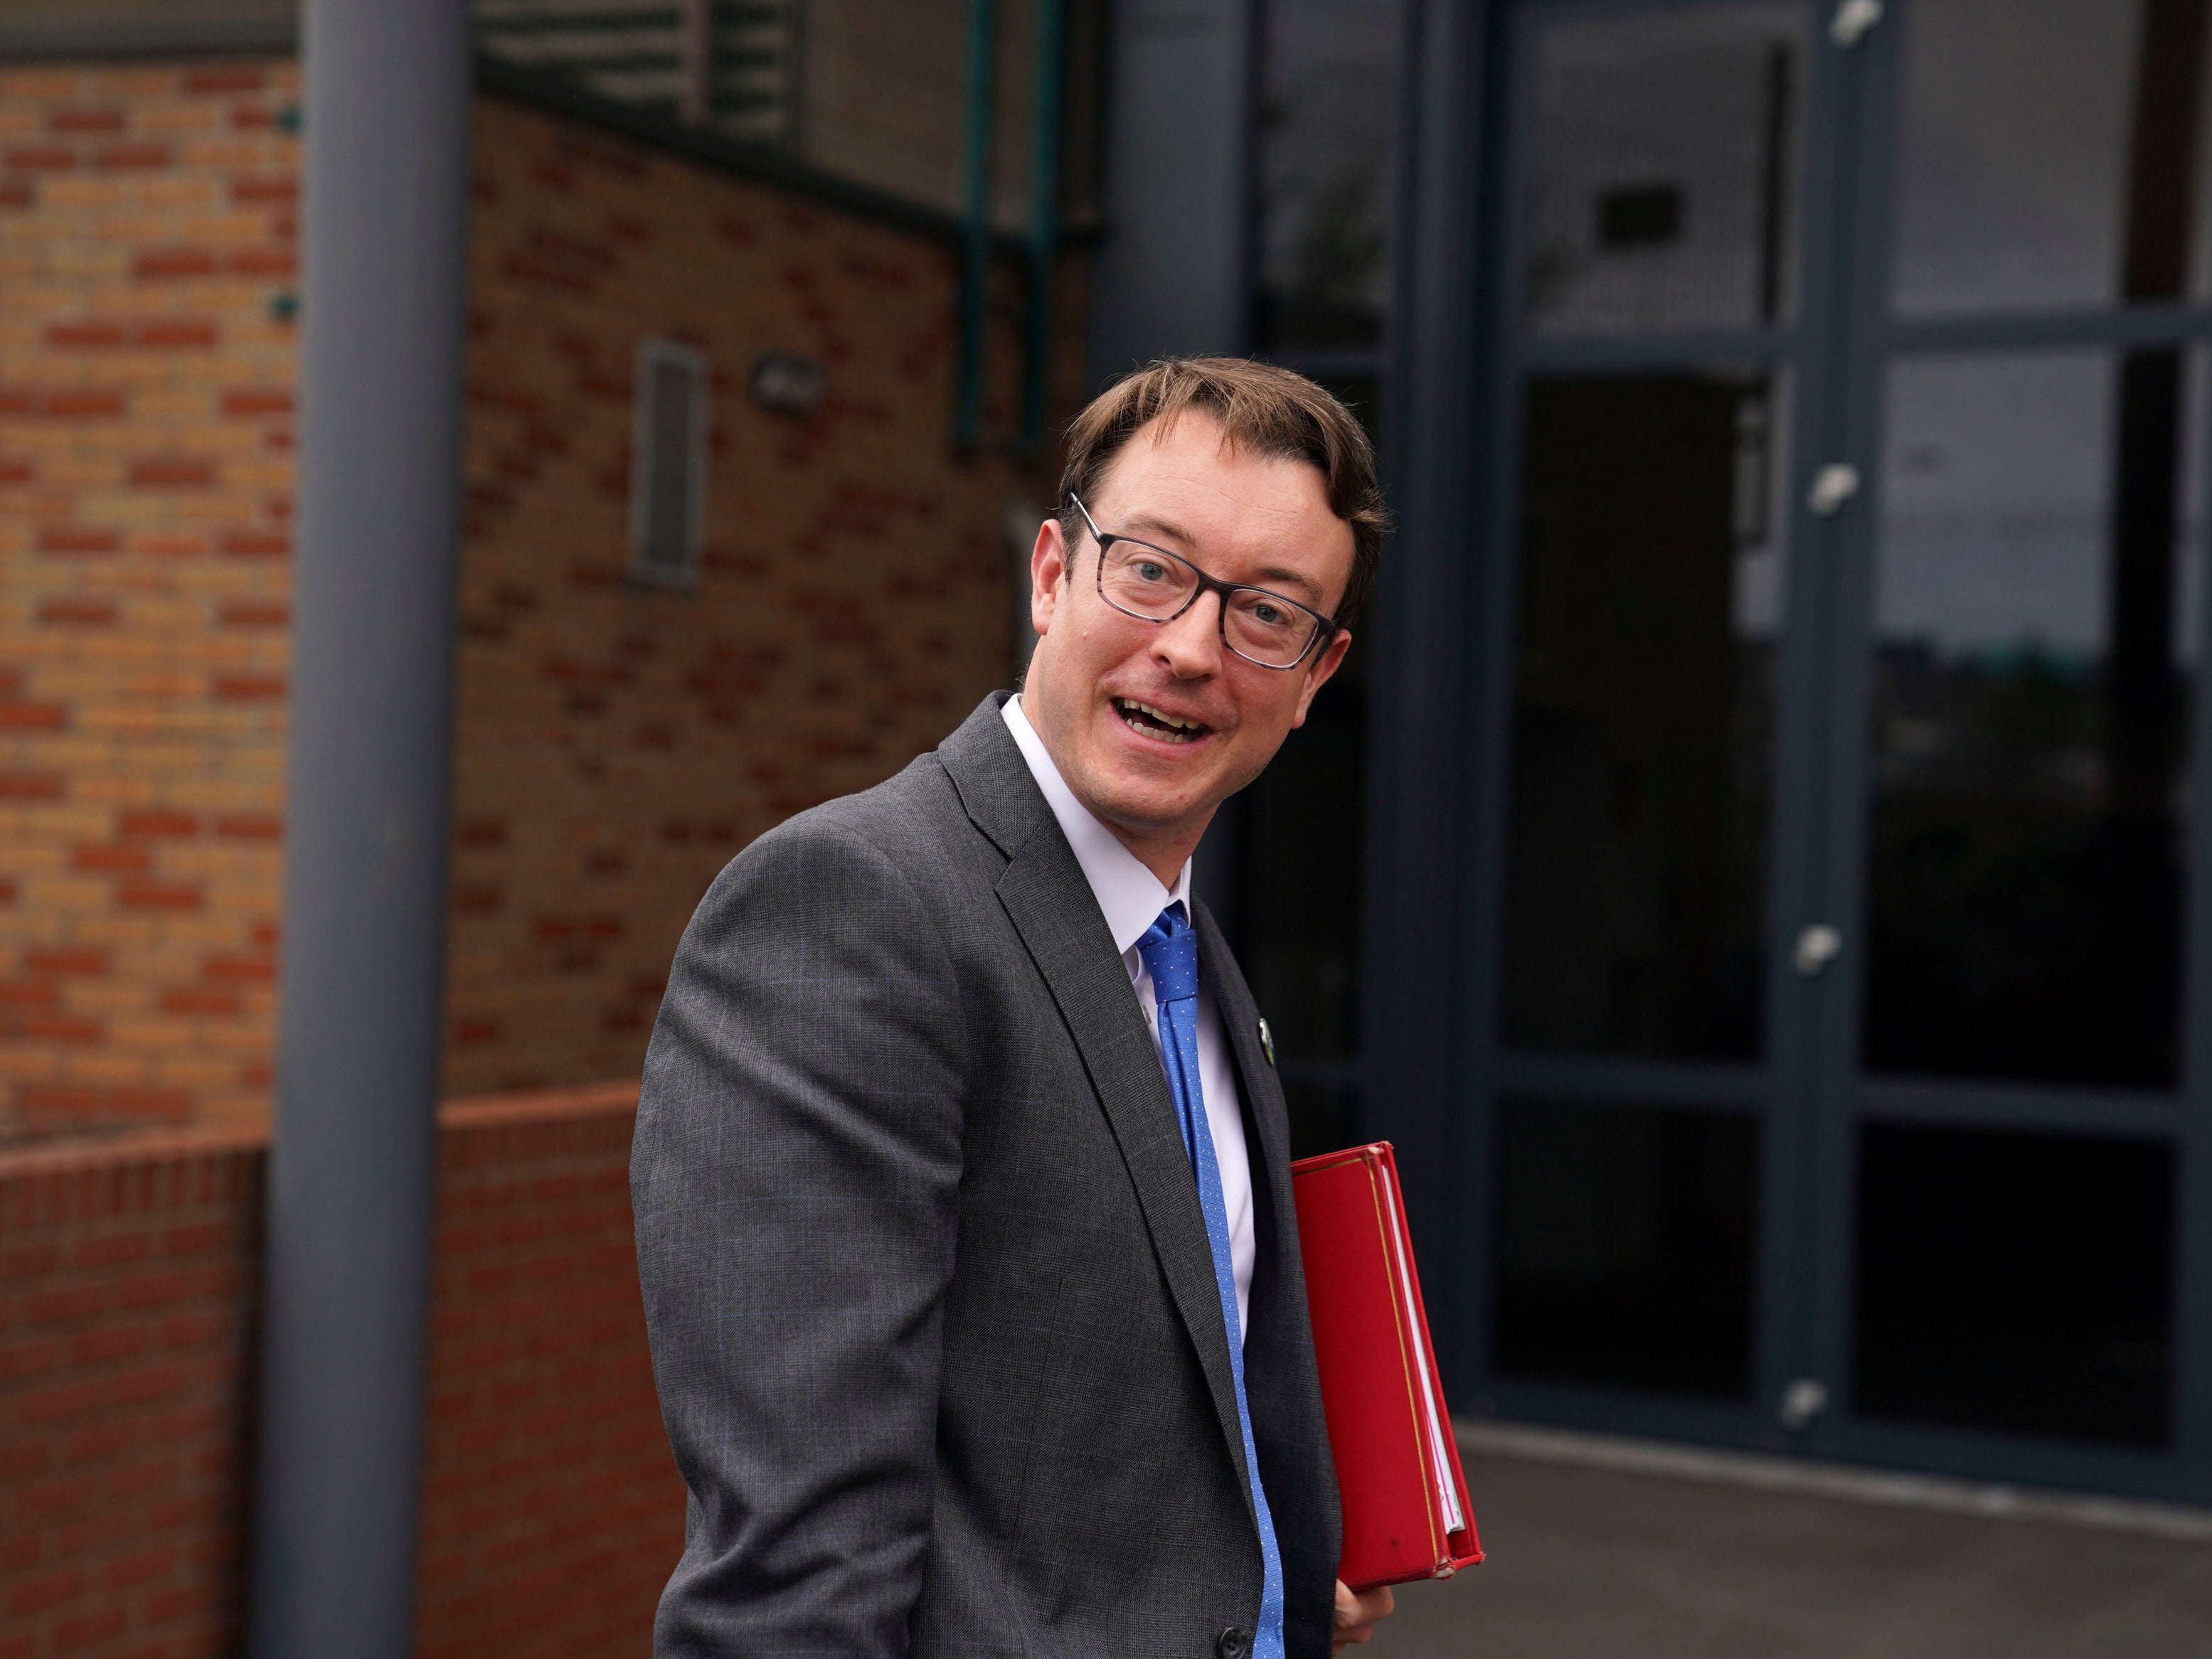 Chief Secretary to the Treasury Simon Clarke arrives for a regional cabinet meeting at Rolls Royce in Bristol